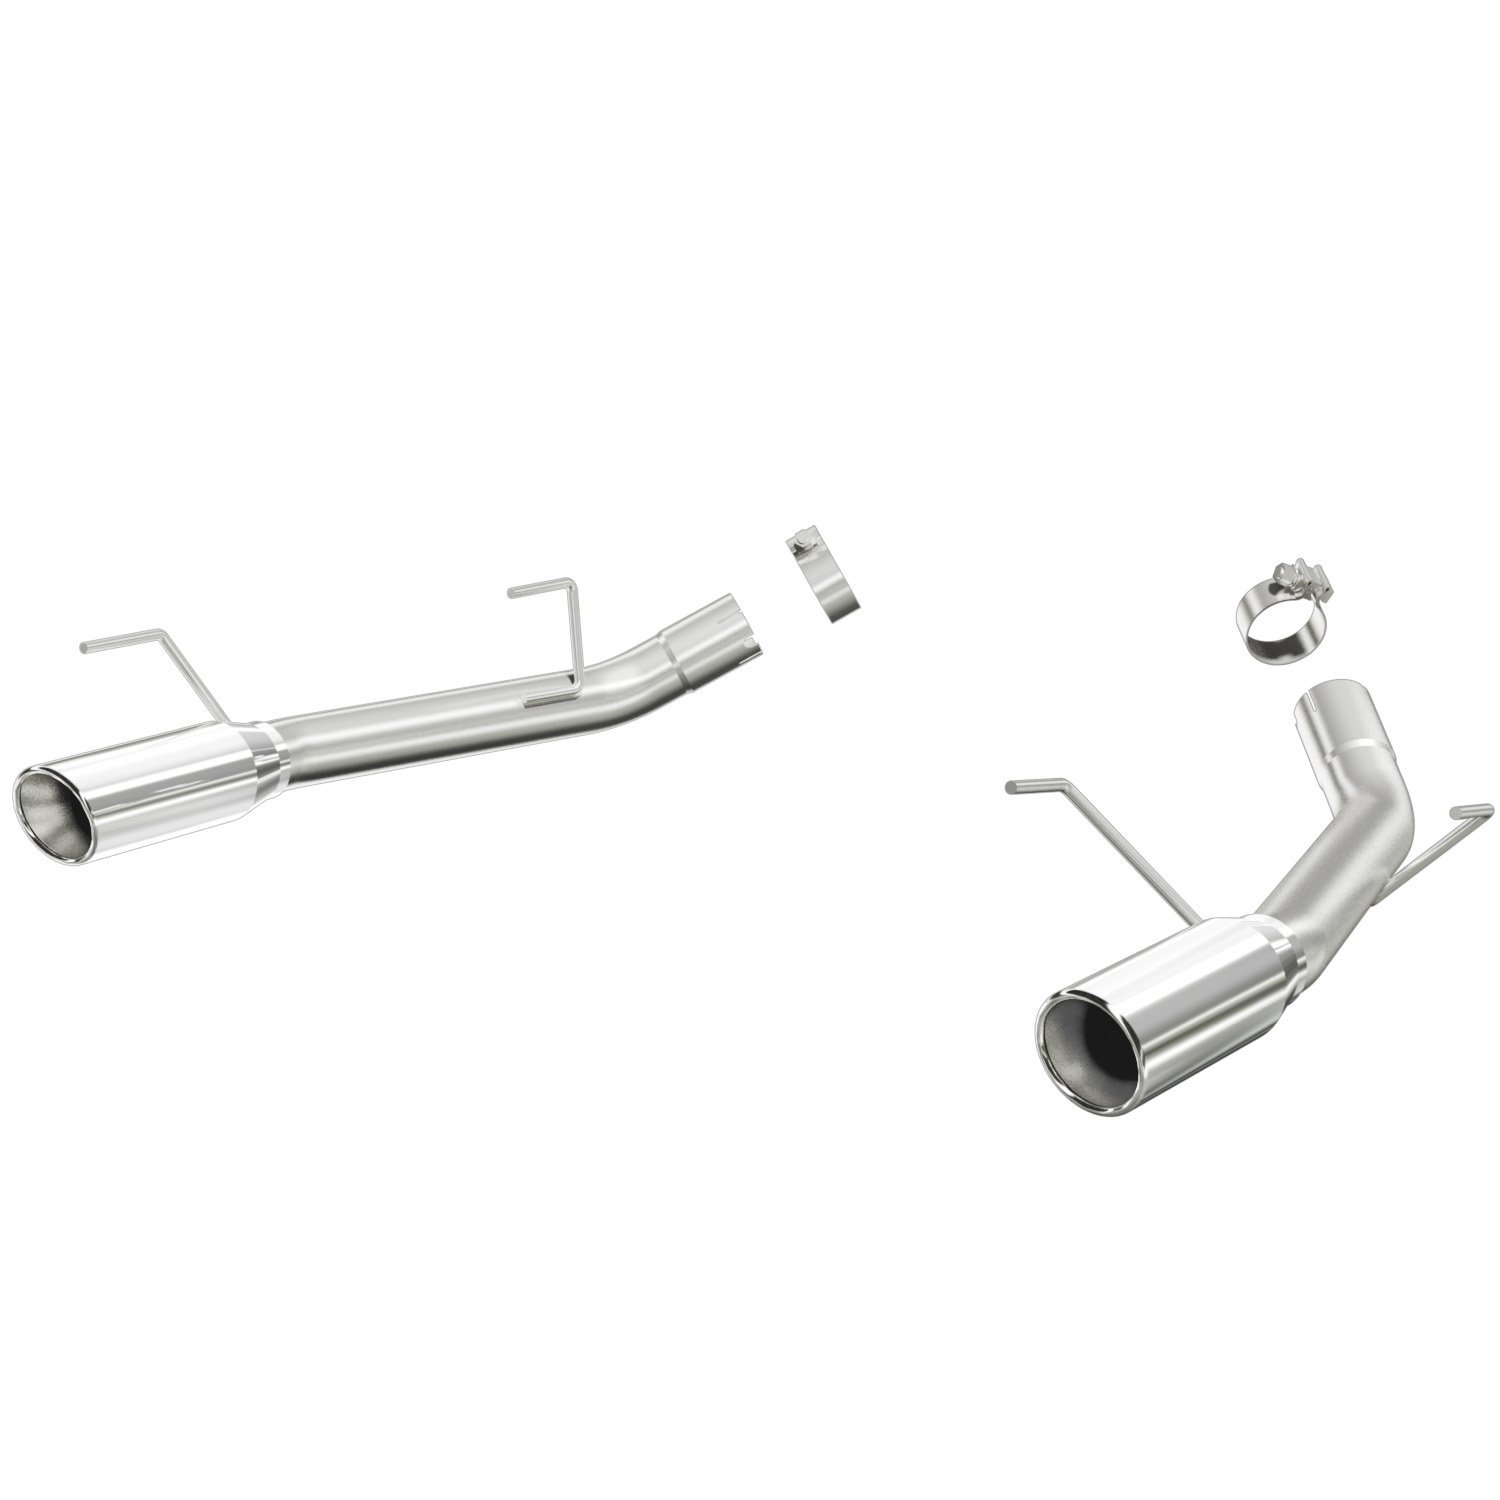 Race Series Axle-Back Exhaust System 2005-09 Mustang 4.0L